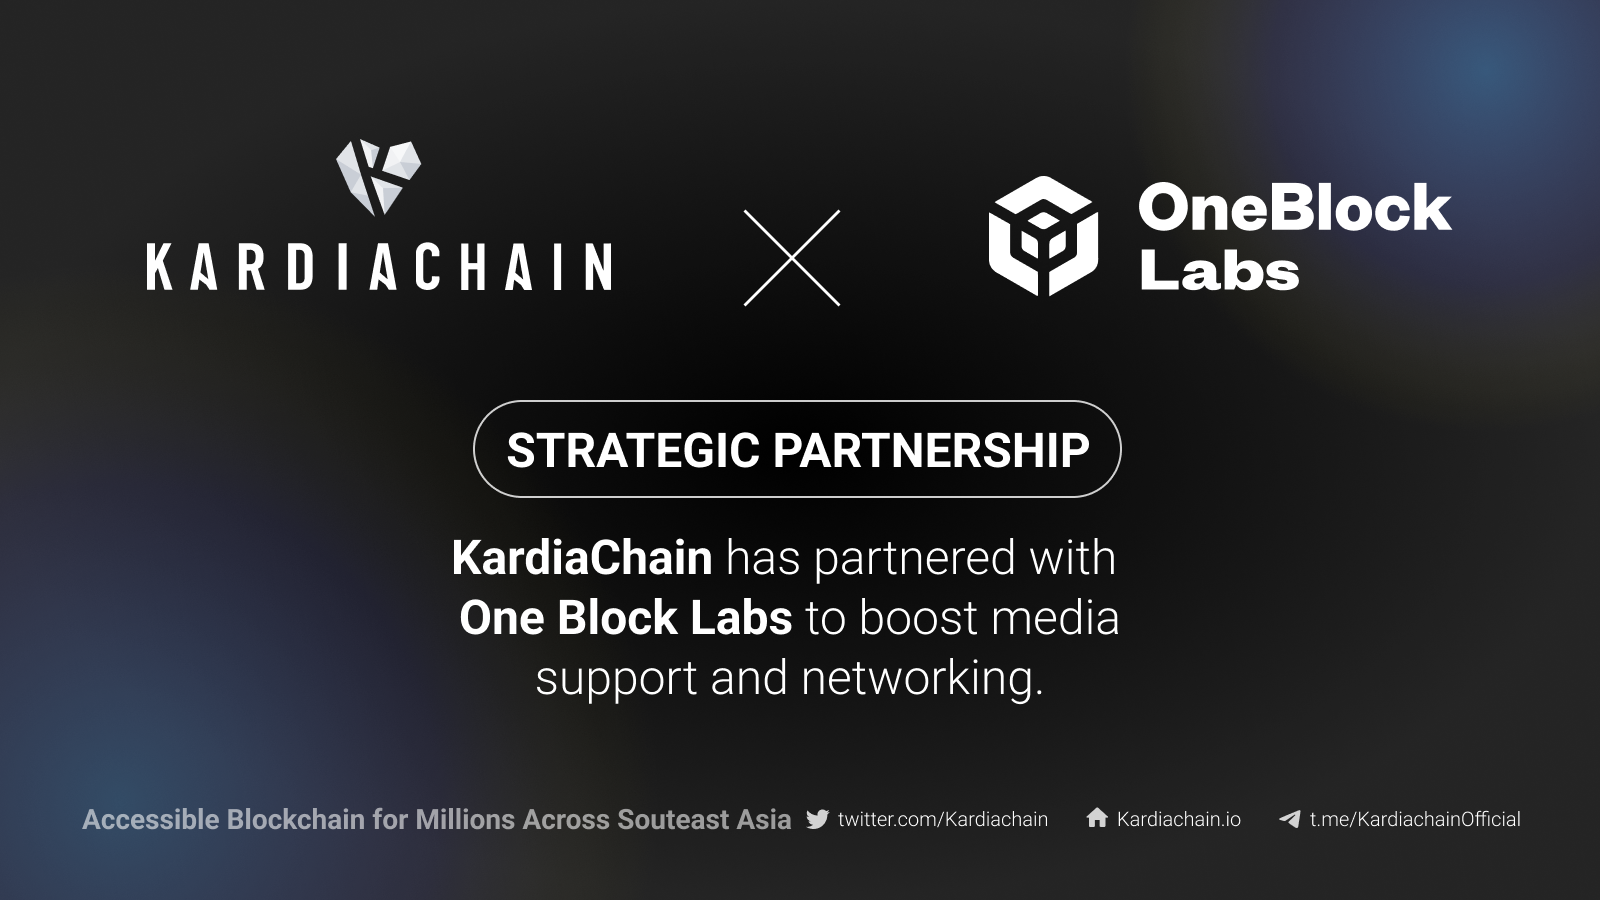 KardiaChain has partnered with OneBlock Labs and pledges to assist KardiaChain with media support and networking